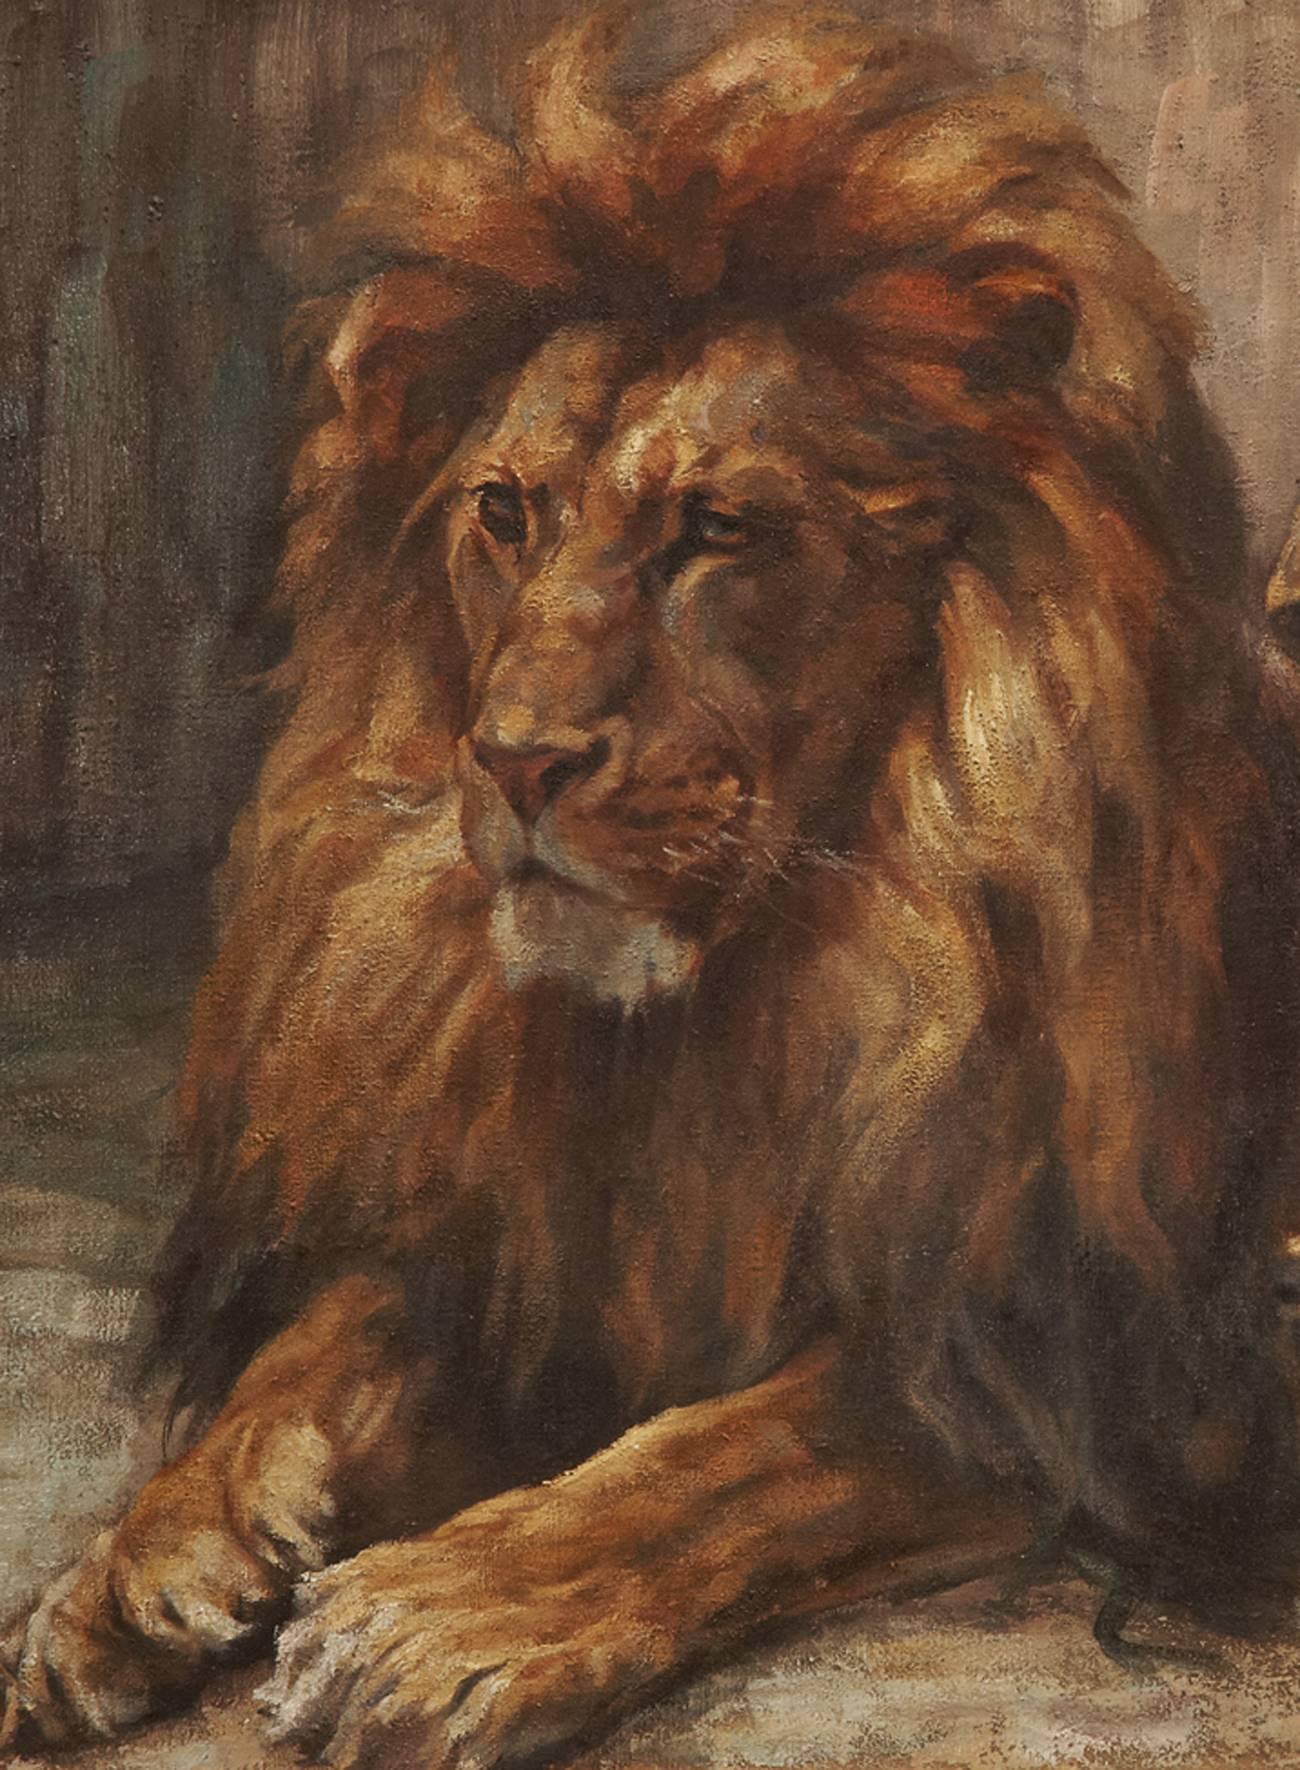 Oil on canvas painting of two resting Lions signed and dated, 1910 by Hedwig Casprzig 1886-1958 in Berlin.
Measures: New frame 103 x 83 cm.